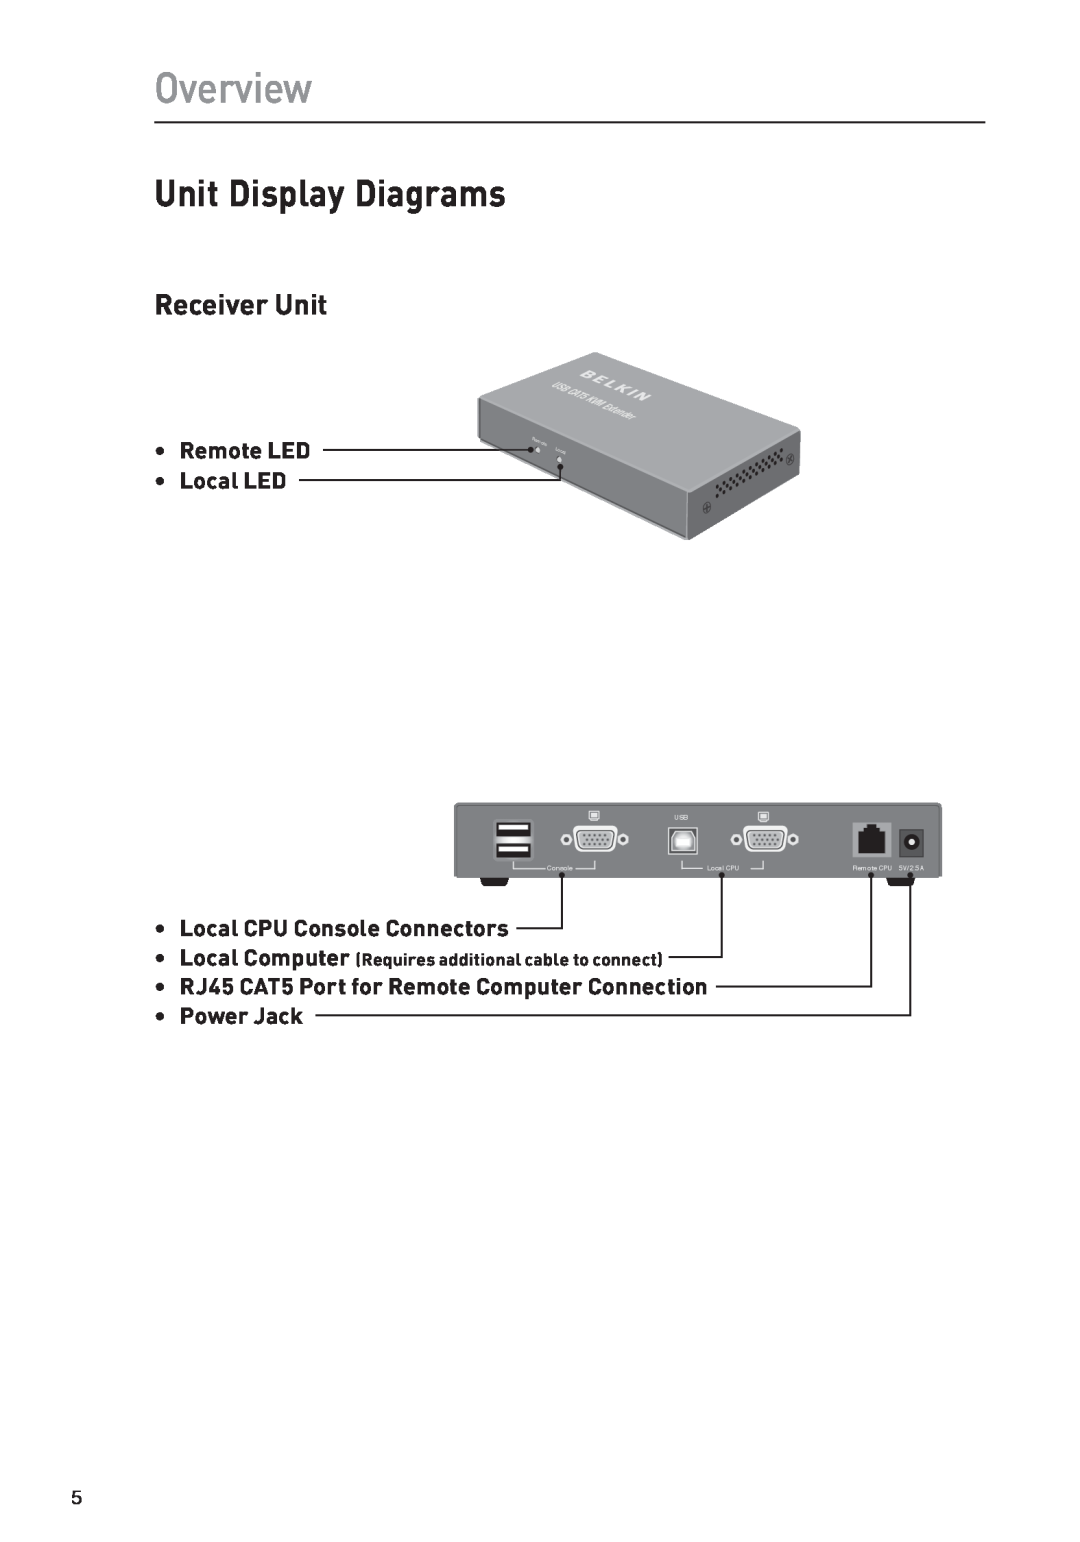 Belkin P75472-A Unit Display Diagrams, Overview, Remote LED Local LED, Local CPU Console Connectors, 533#!4 +6 - %XTENDER 